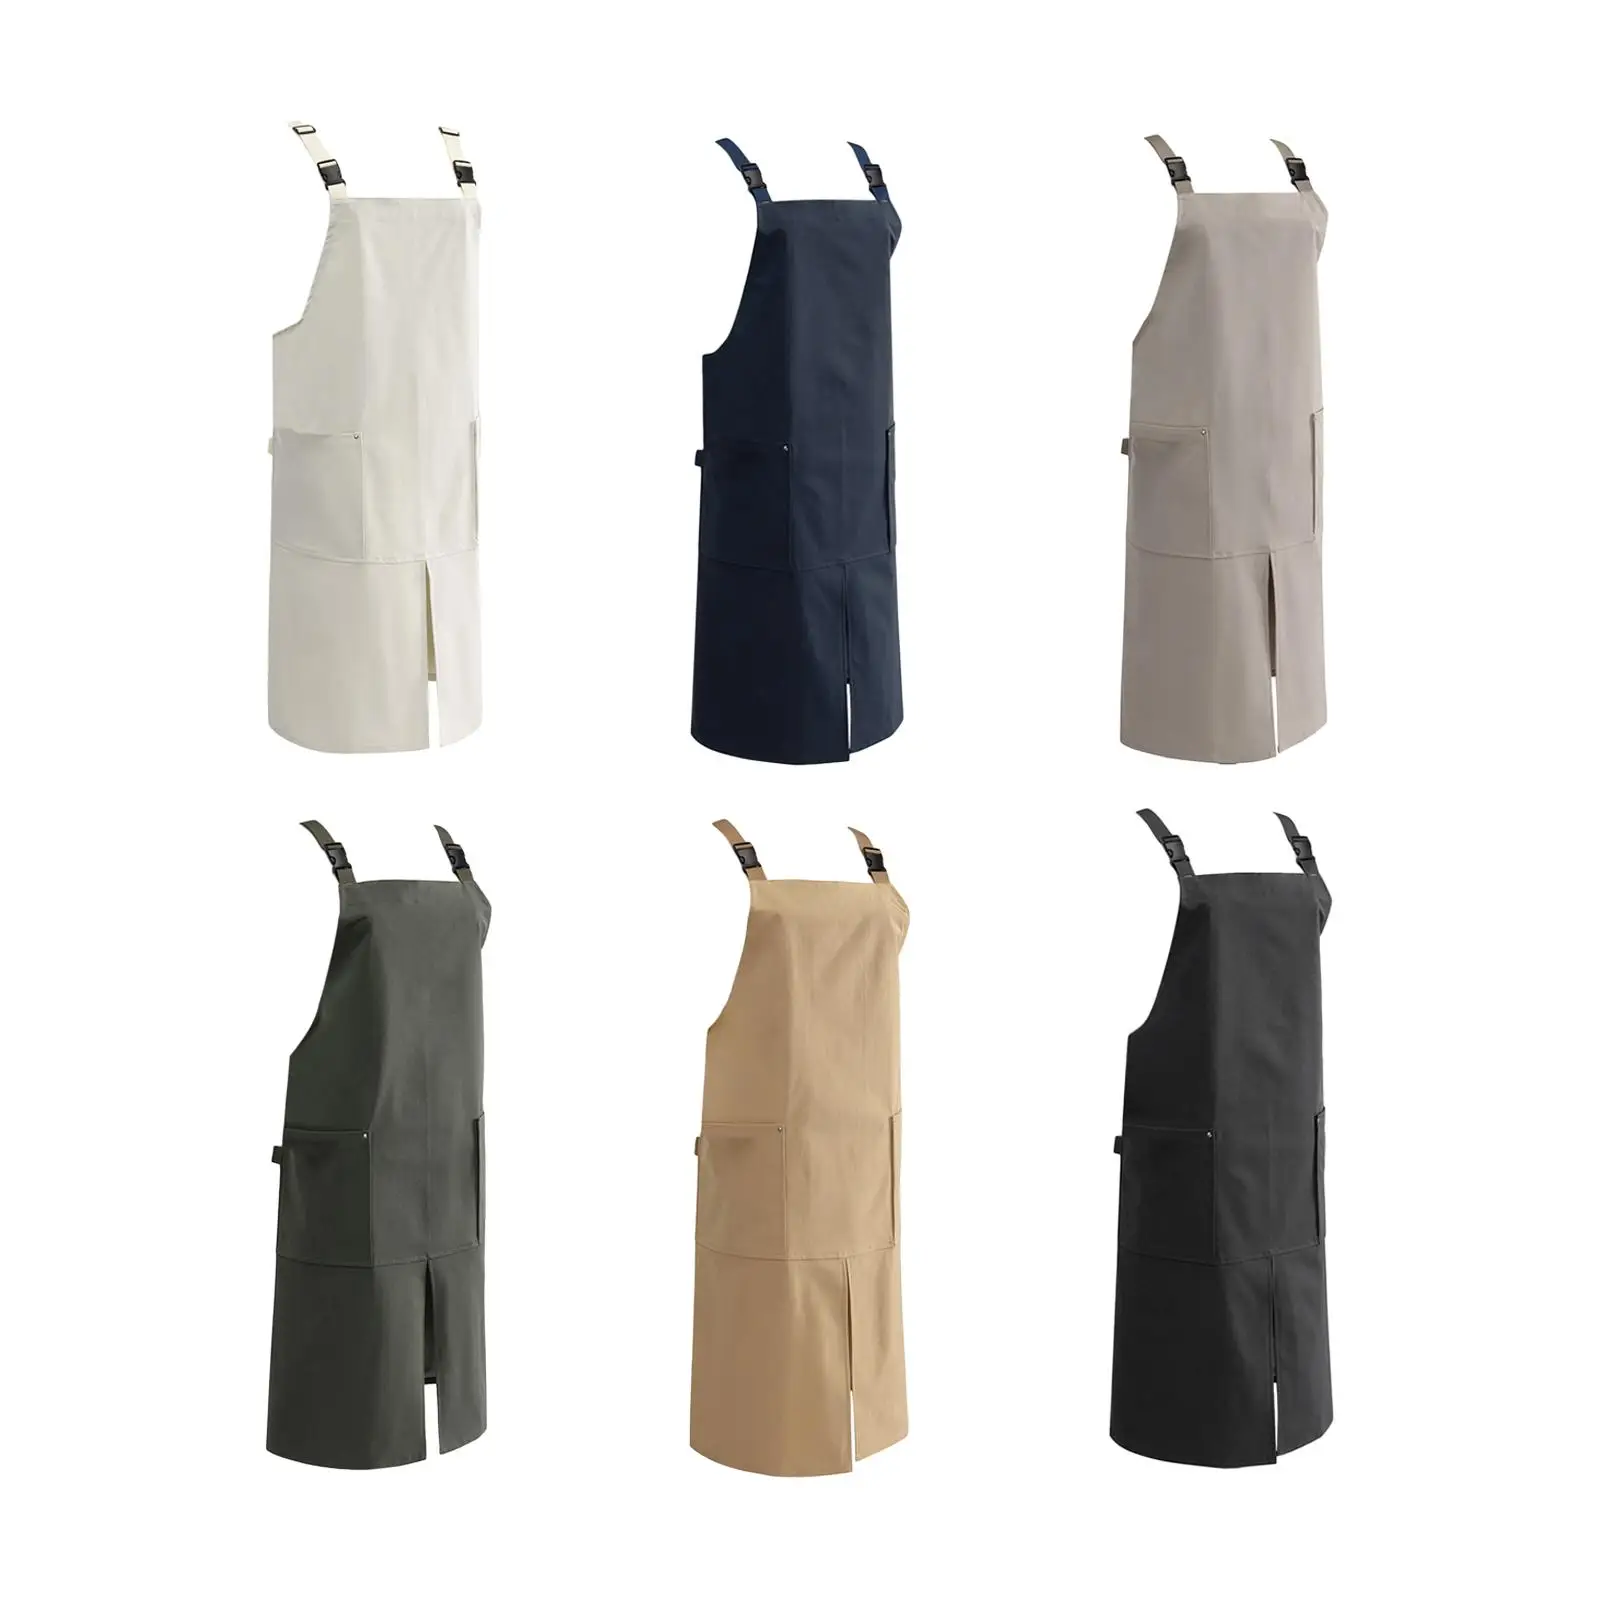 Kitchen Cooking Baking Apron Coffee Restaurant Work Clothes Unisex Canvas Apron for Hair Stylist Painting Hairdressers Uniform